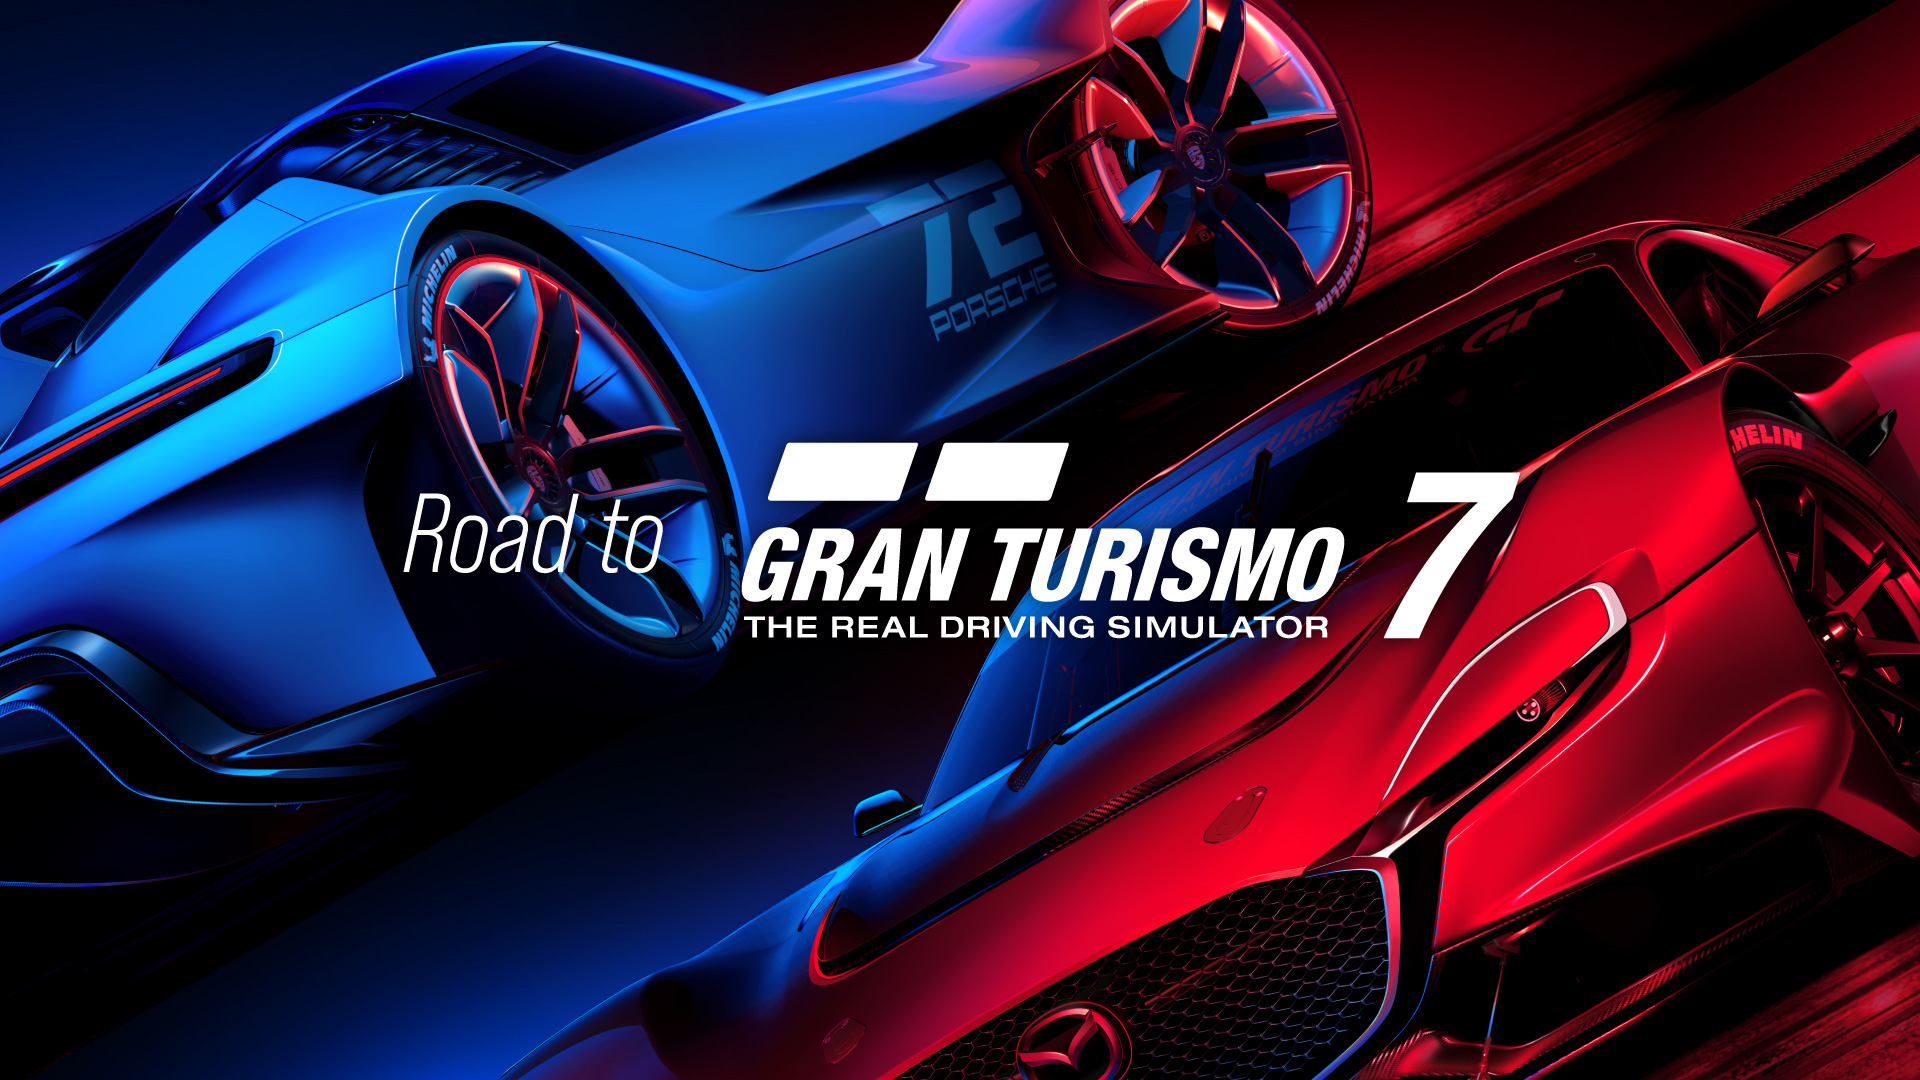 Does Gran Turismo 7 have open world?